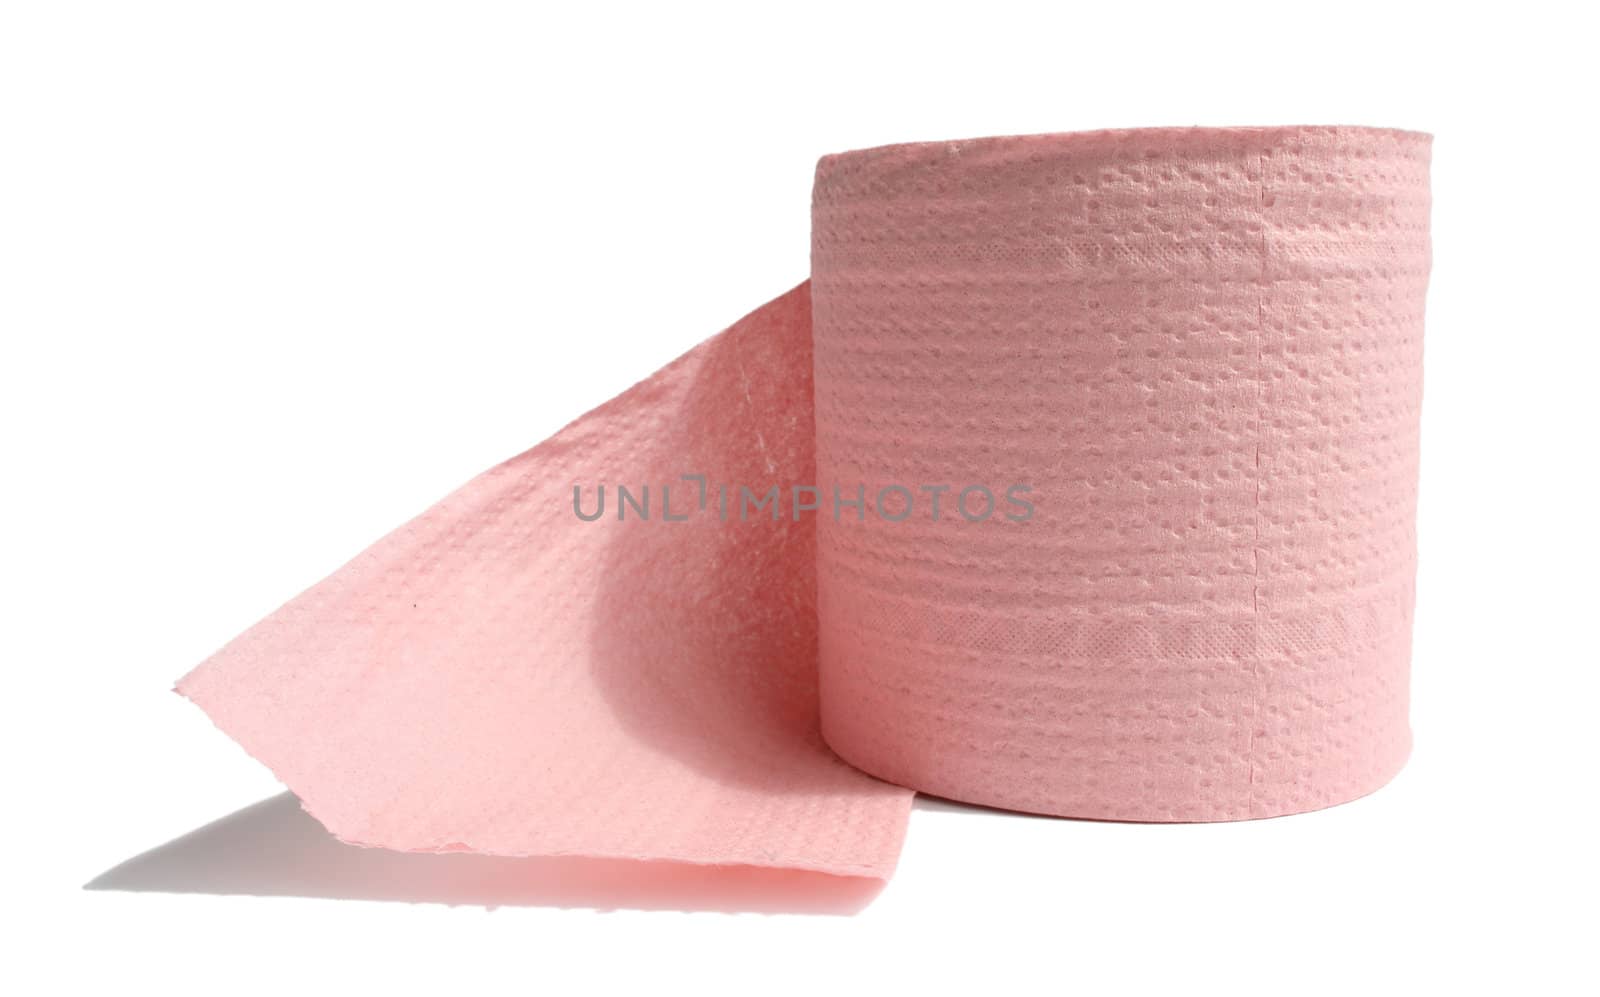 Roll of a pink toilet paper on a white background.